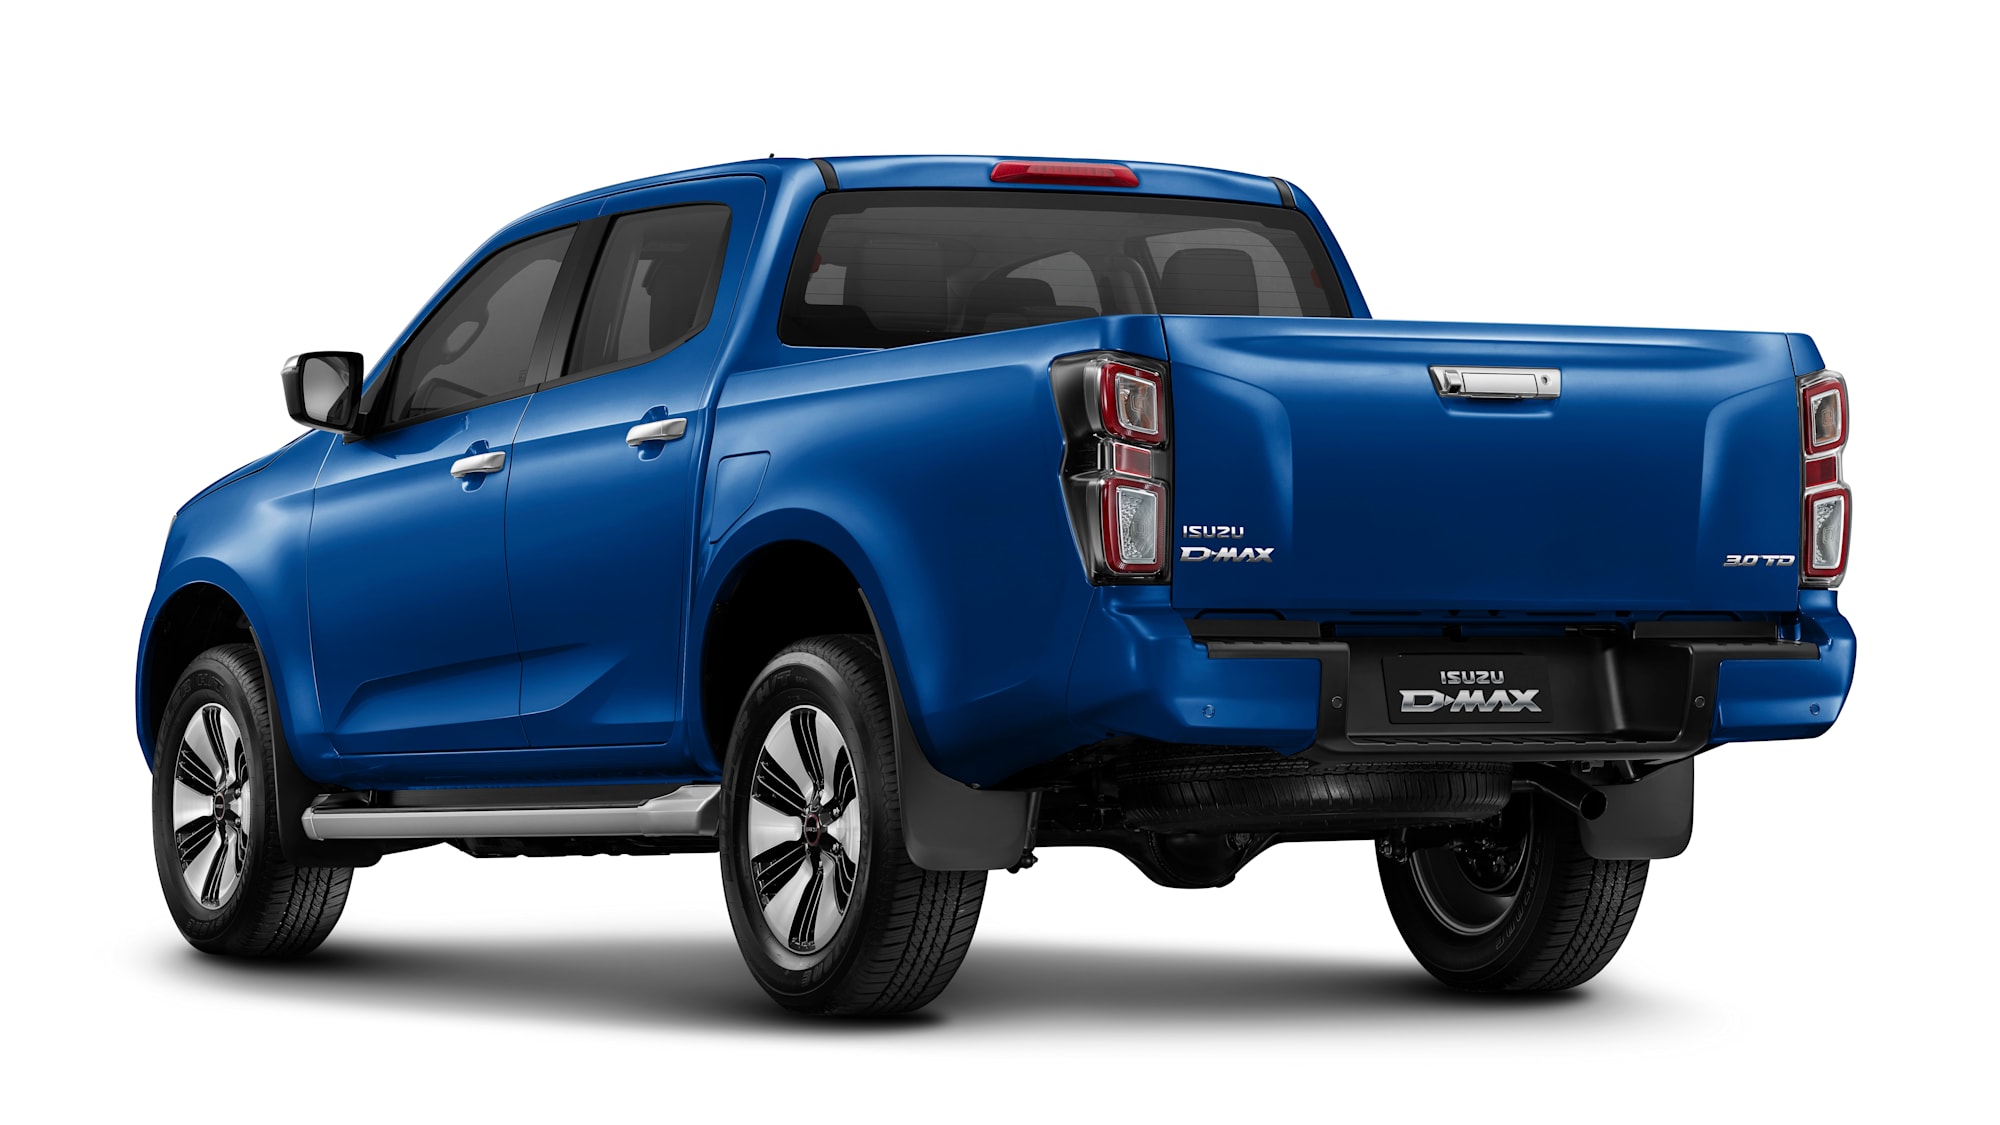 2021 Isuzu D-Max price and specs: First new model in ...